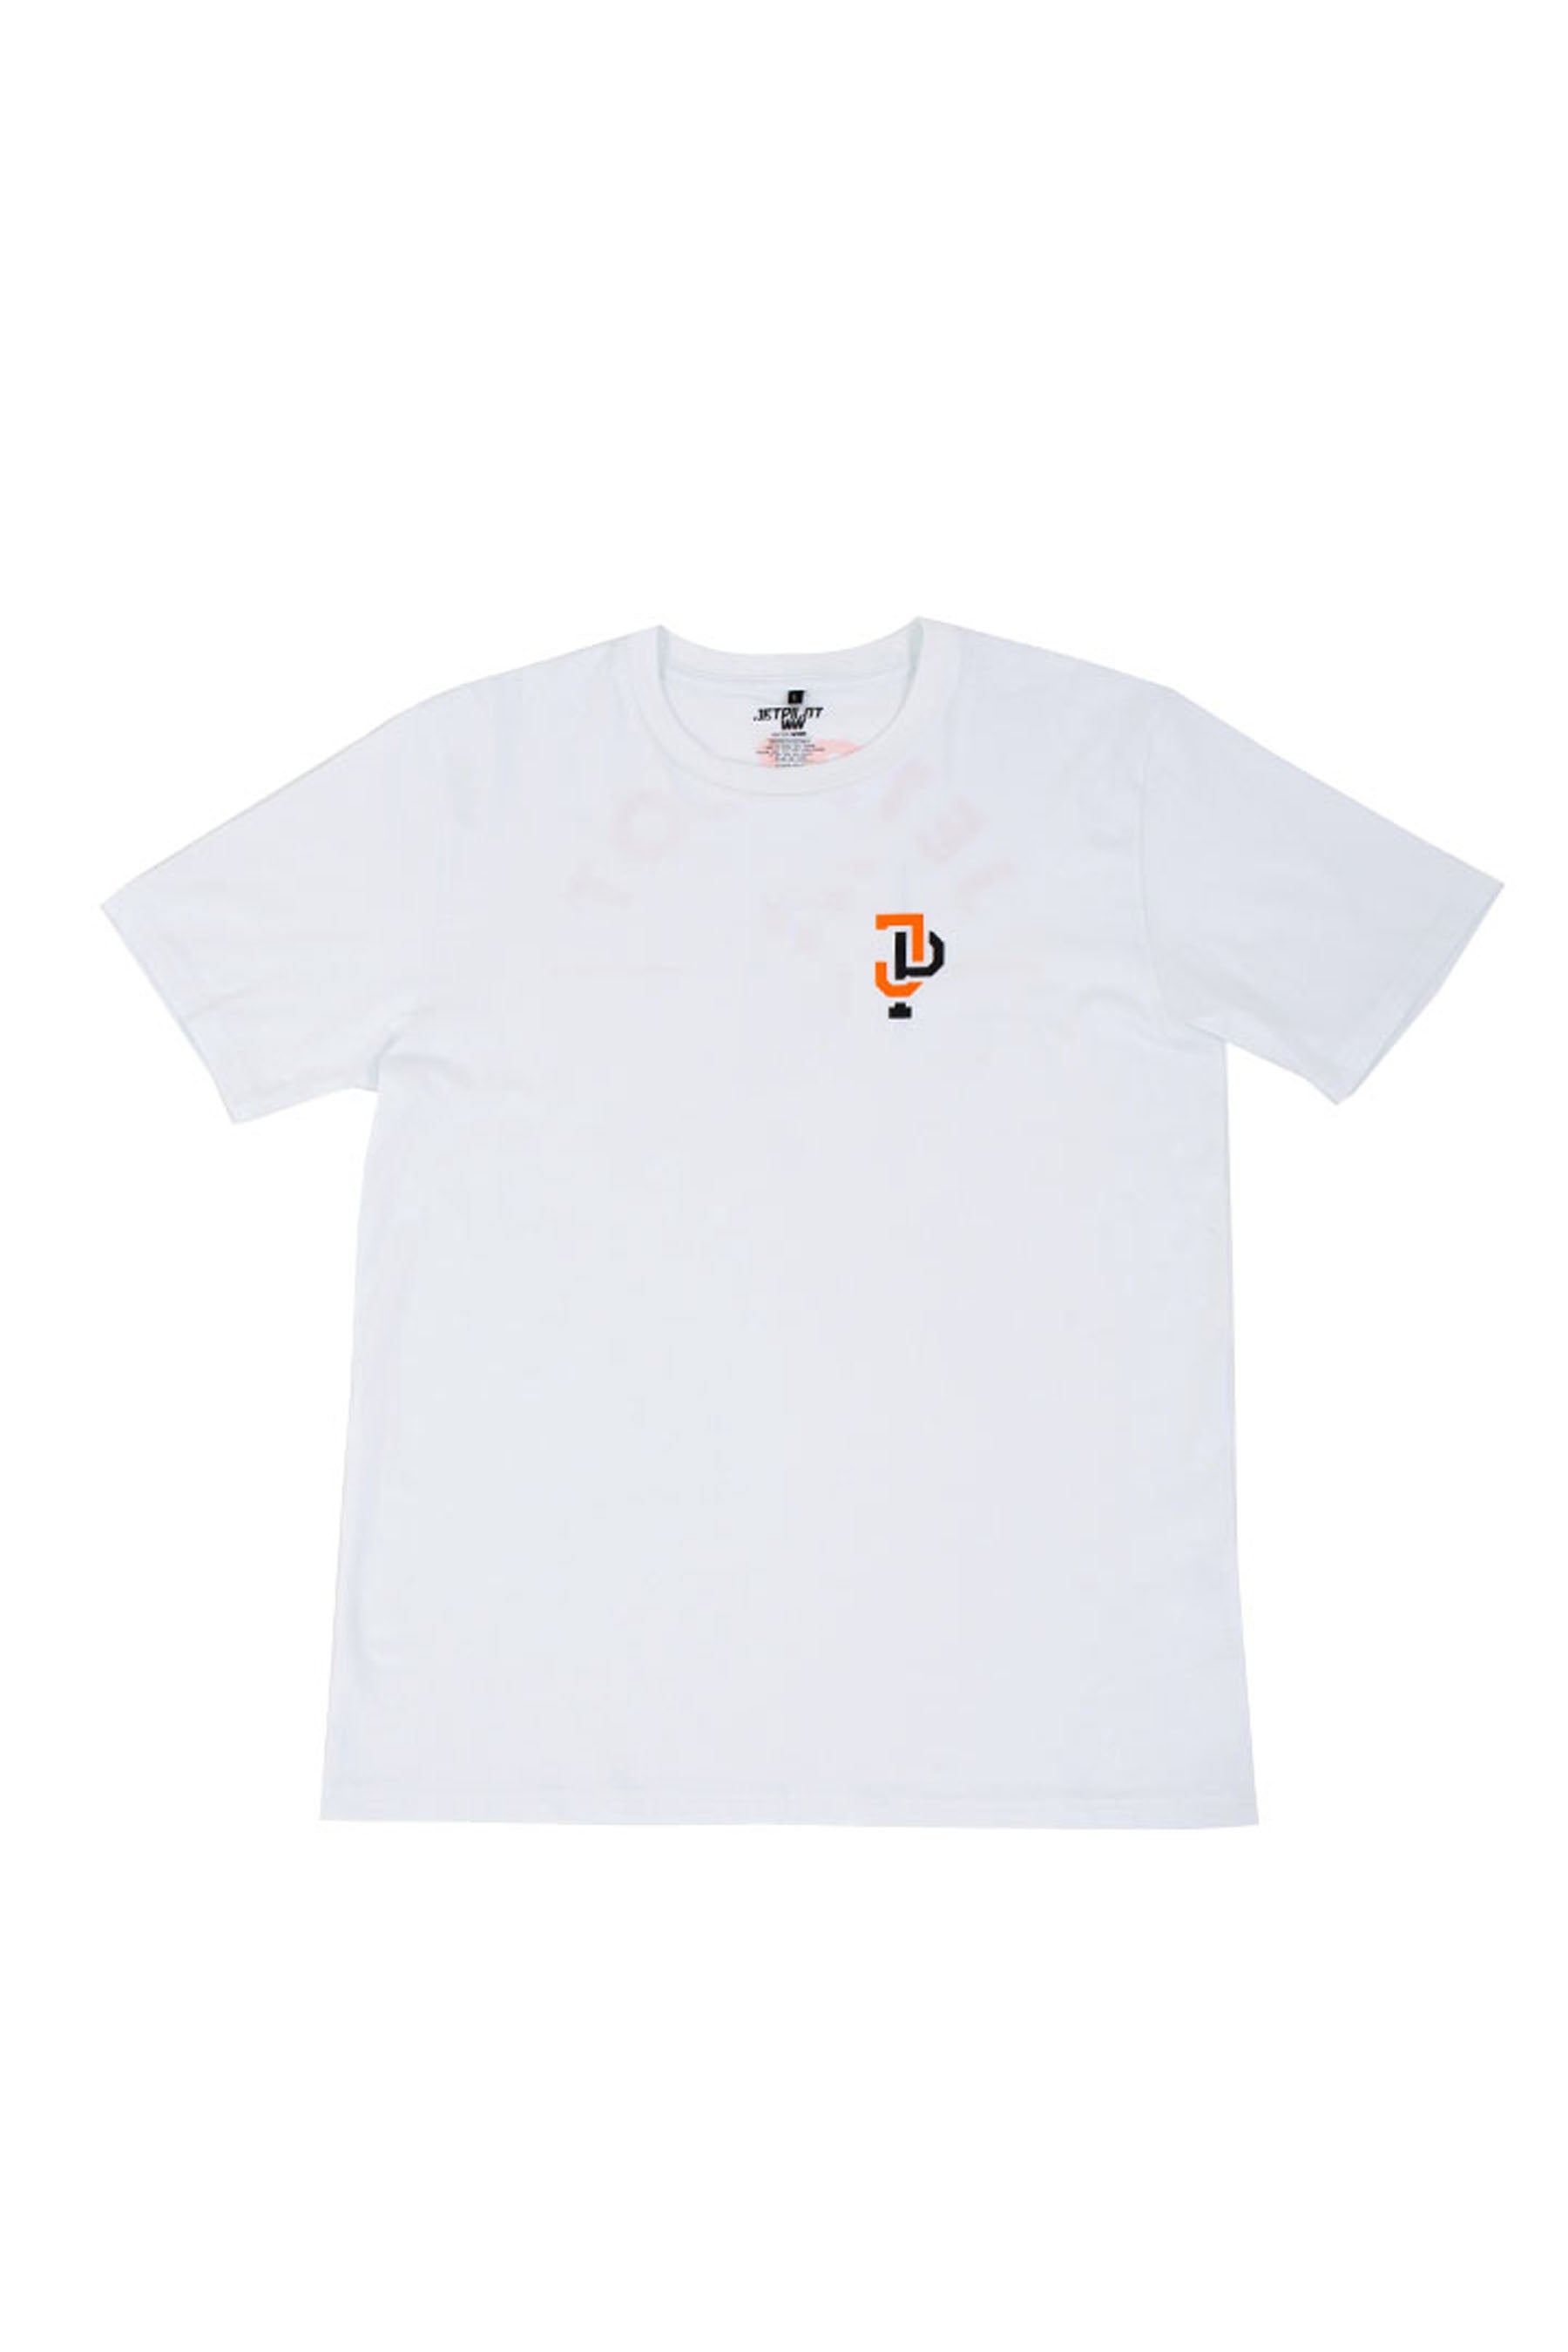 LINKED YOUTH SS TEE